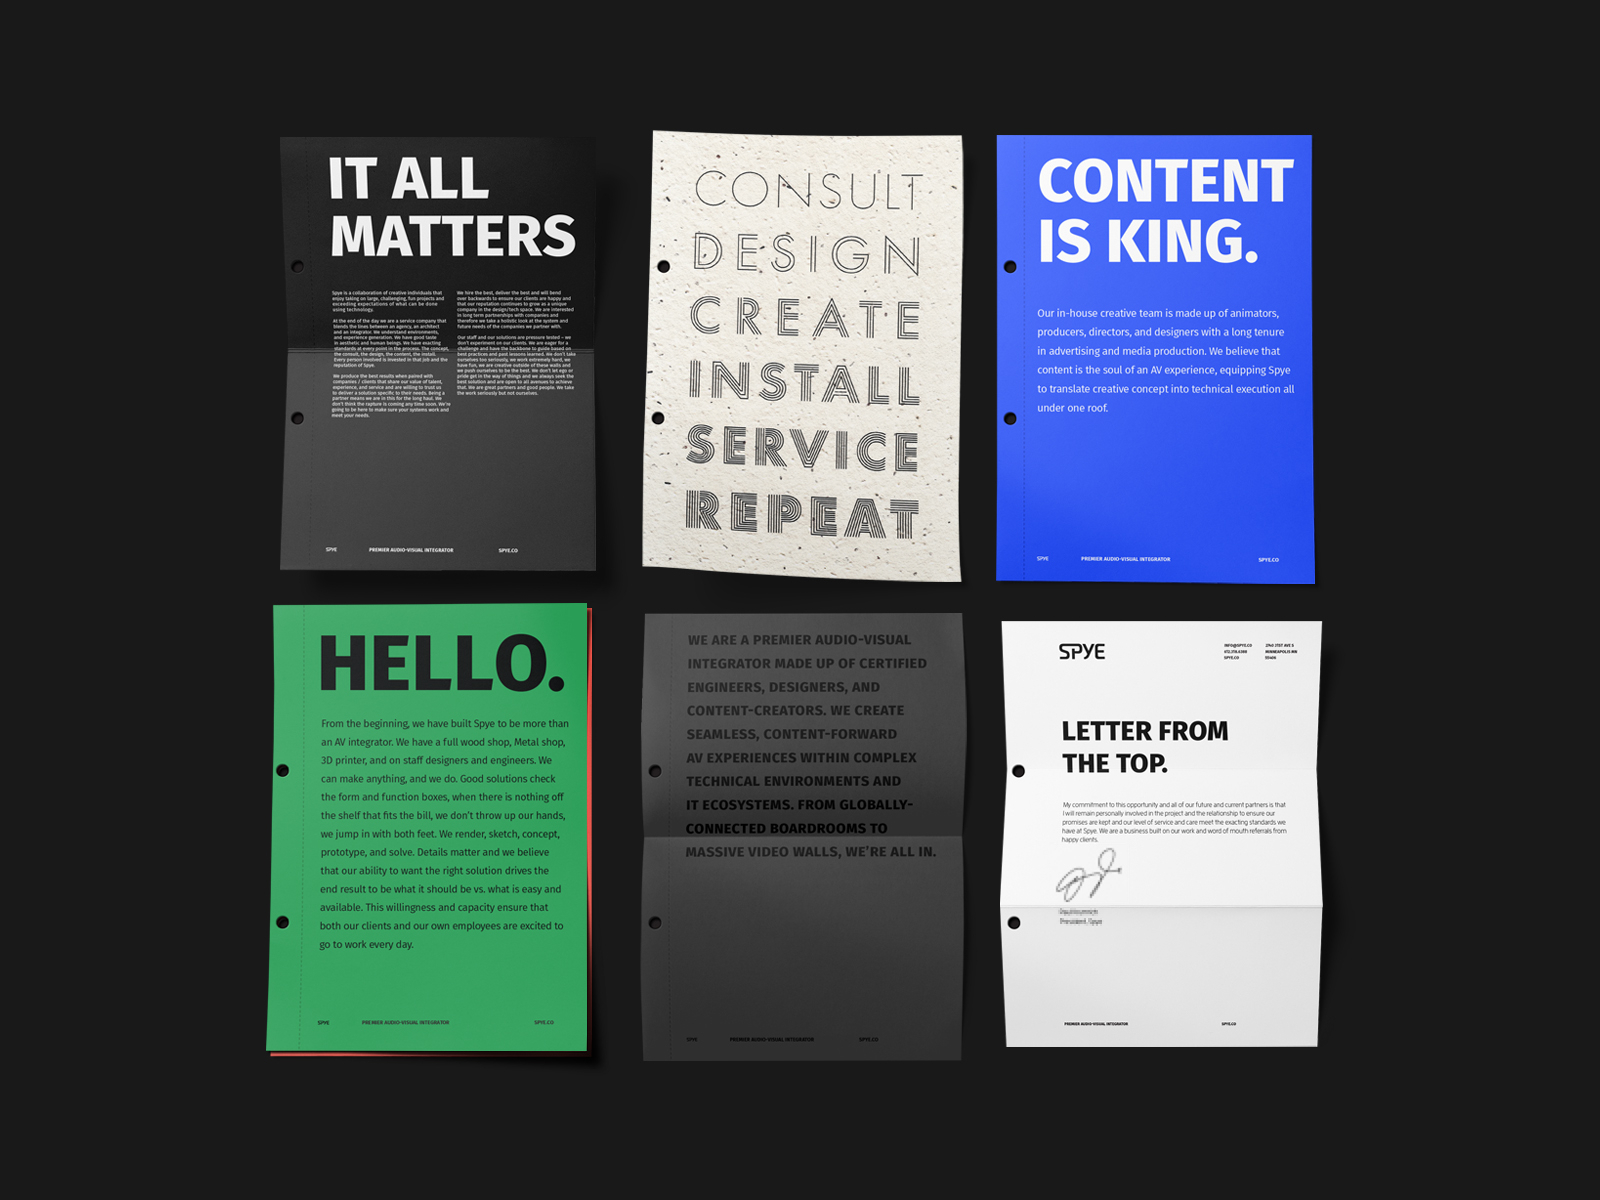 Company letterhead and document inserts by Tianrui Zhang on Dribbble